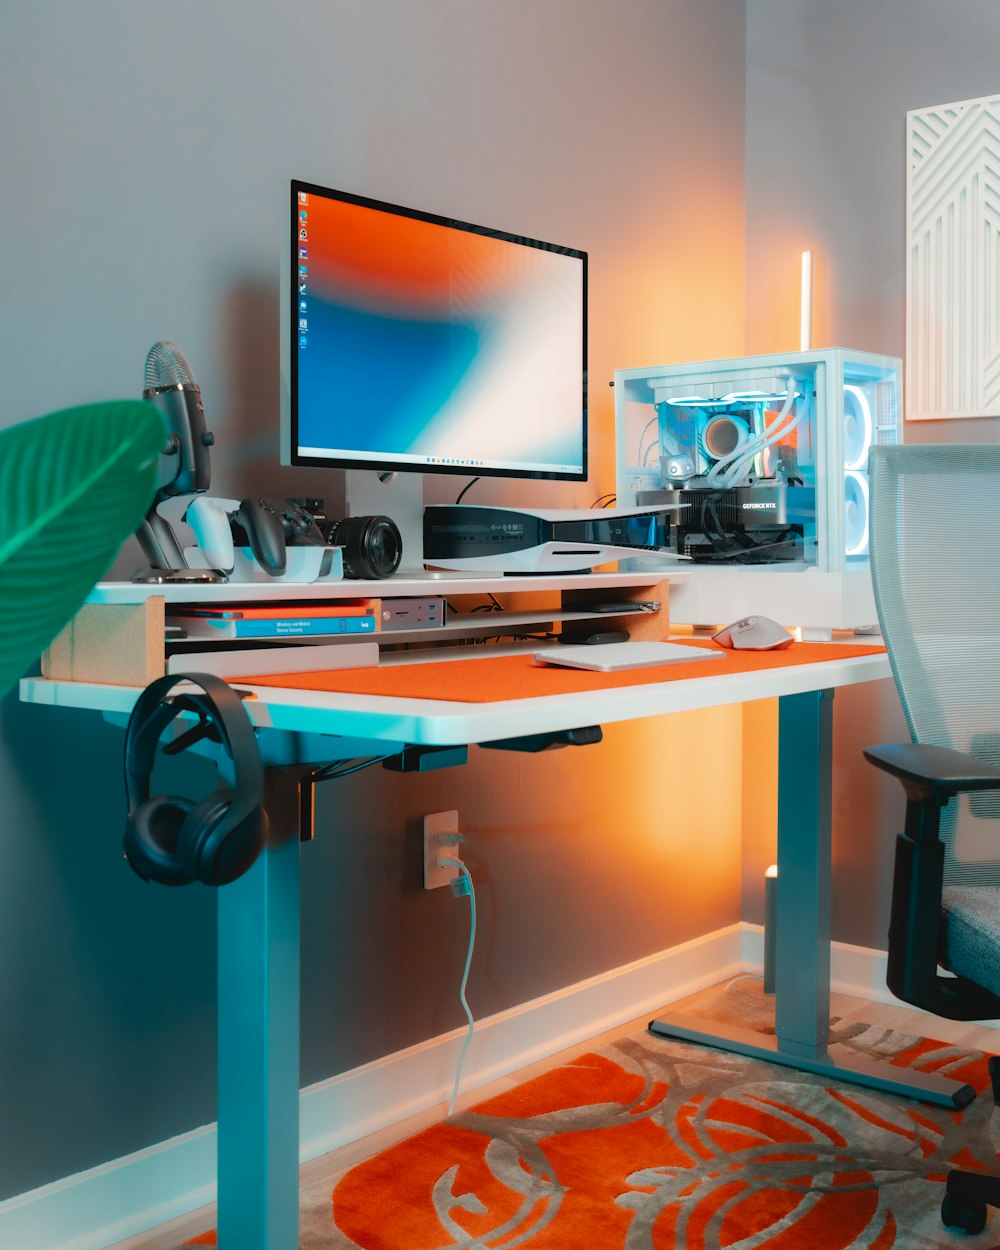 a desk with a computer monitor, keyboard and mouse